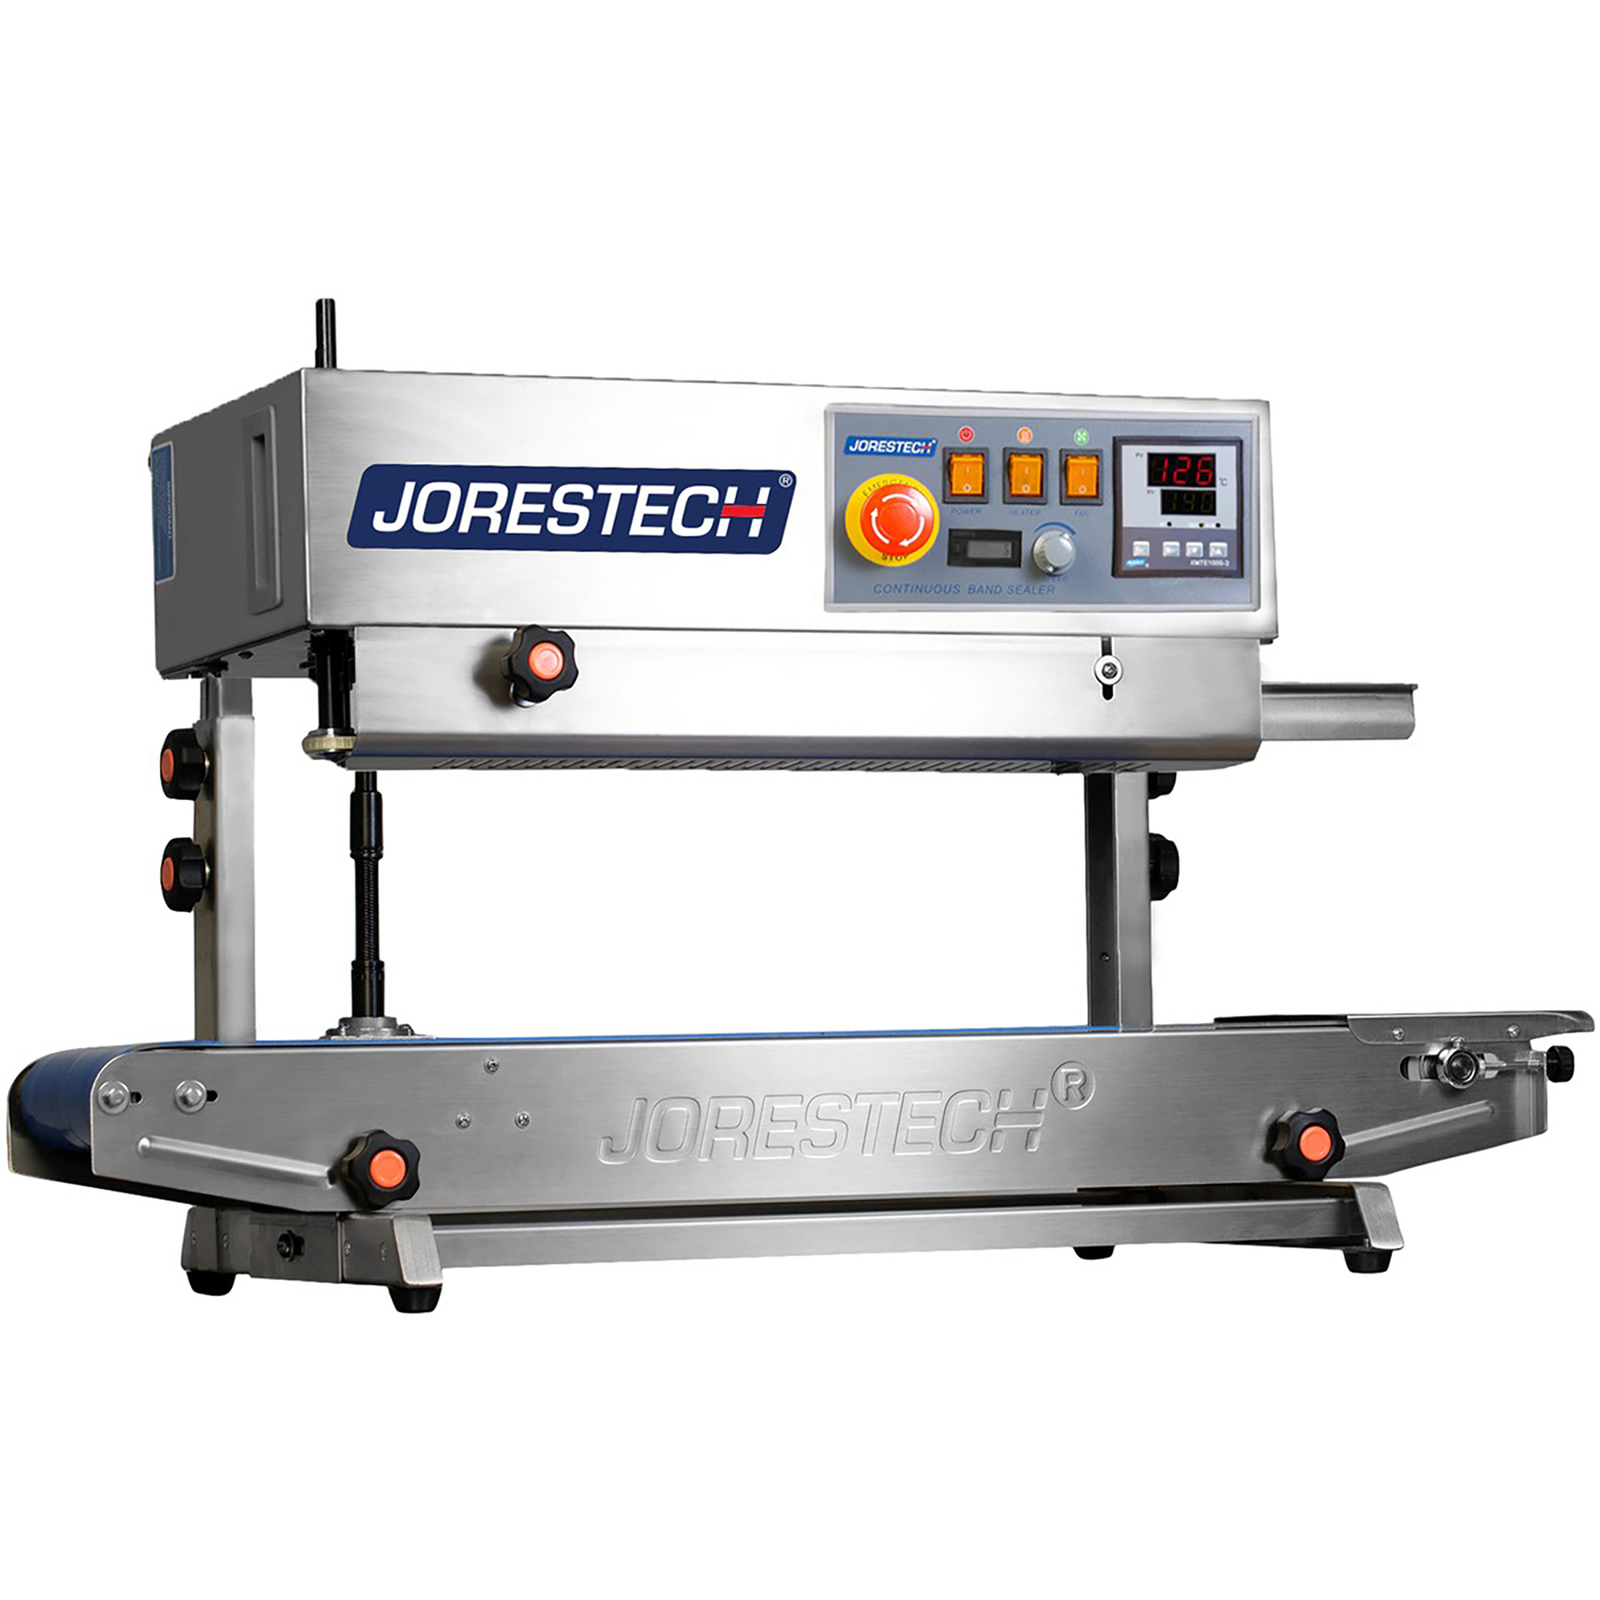 Stainless-steel JORES TECHNOLOGIES® horizontal and vertical continuous band sealer with counter and digital temperature adjuster